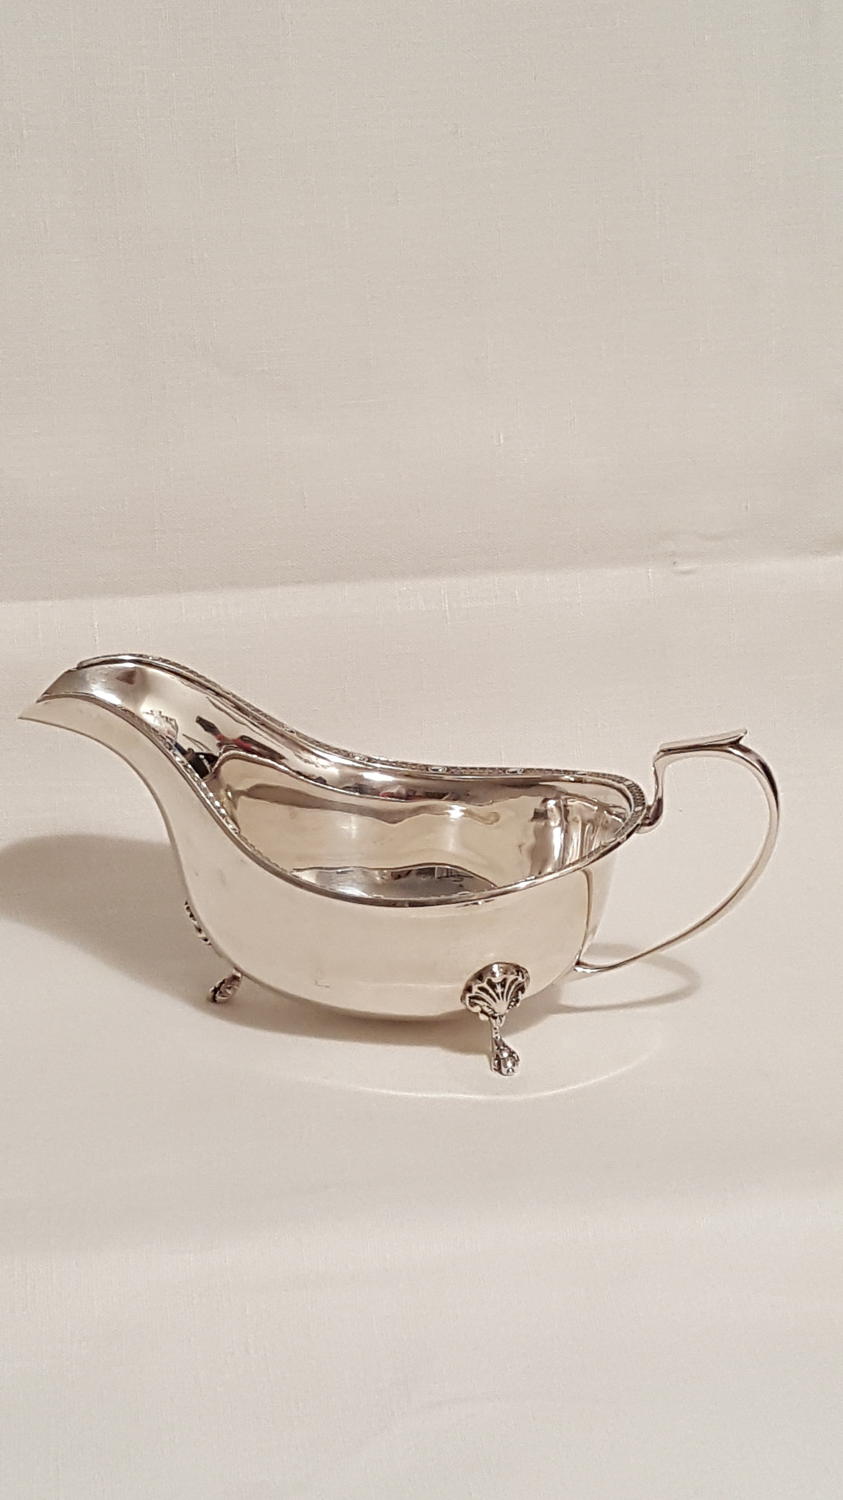 Antique Silver Sauce Boat